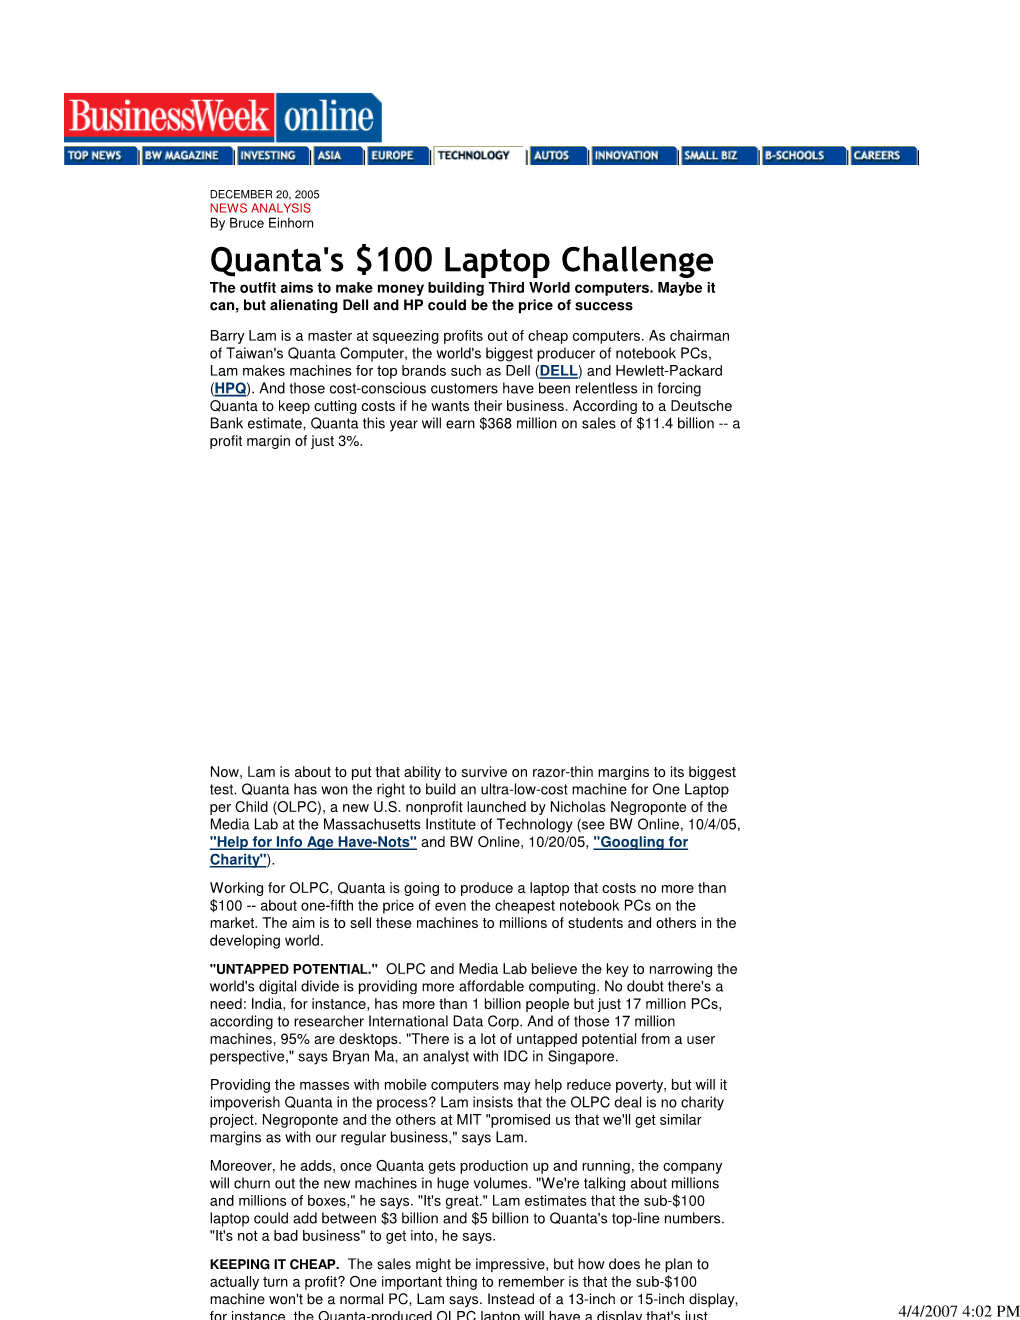 Quanta's $100 Laptop Challenge the Outfit Aims to Make Money Building Third World Computers